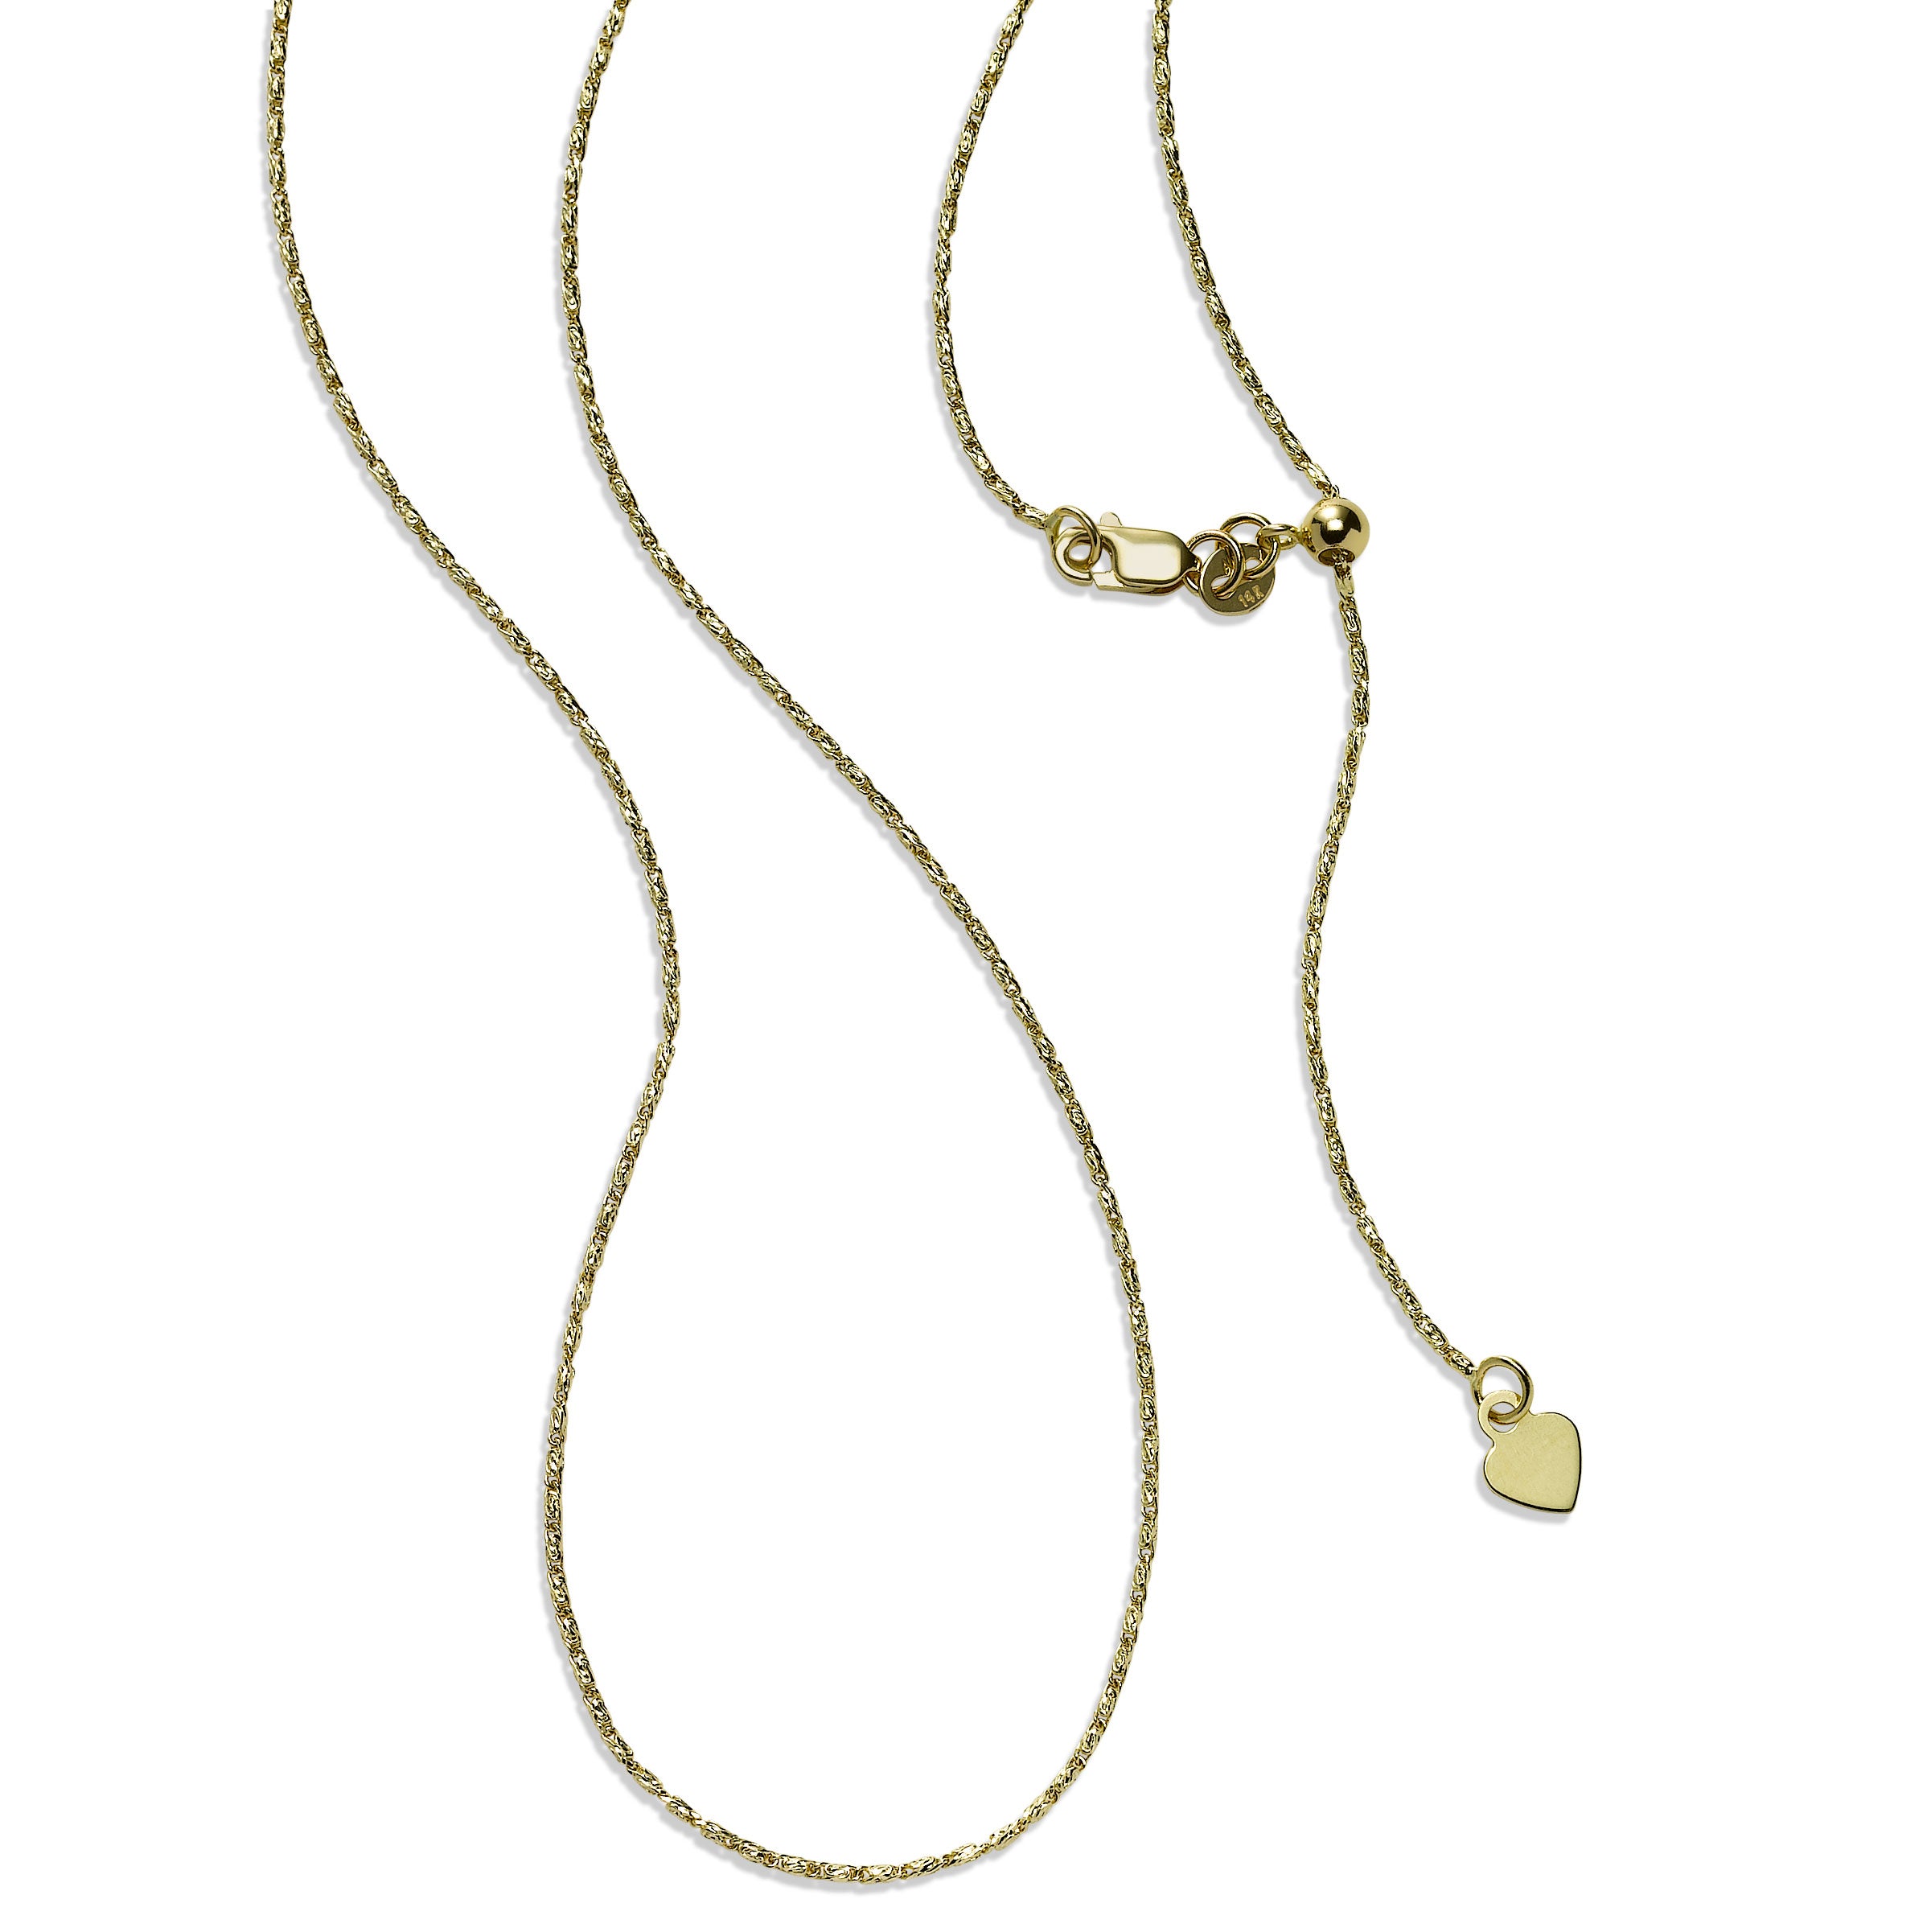 Necklace for women: Snake pendant in gold | THOMAS SABO